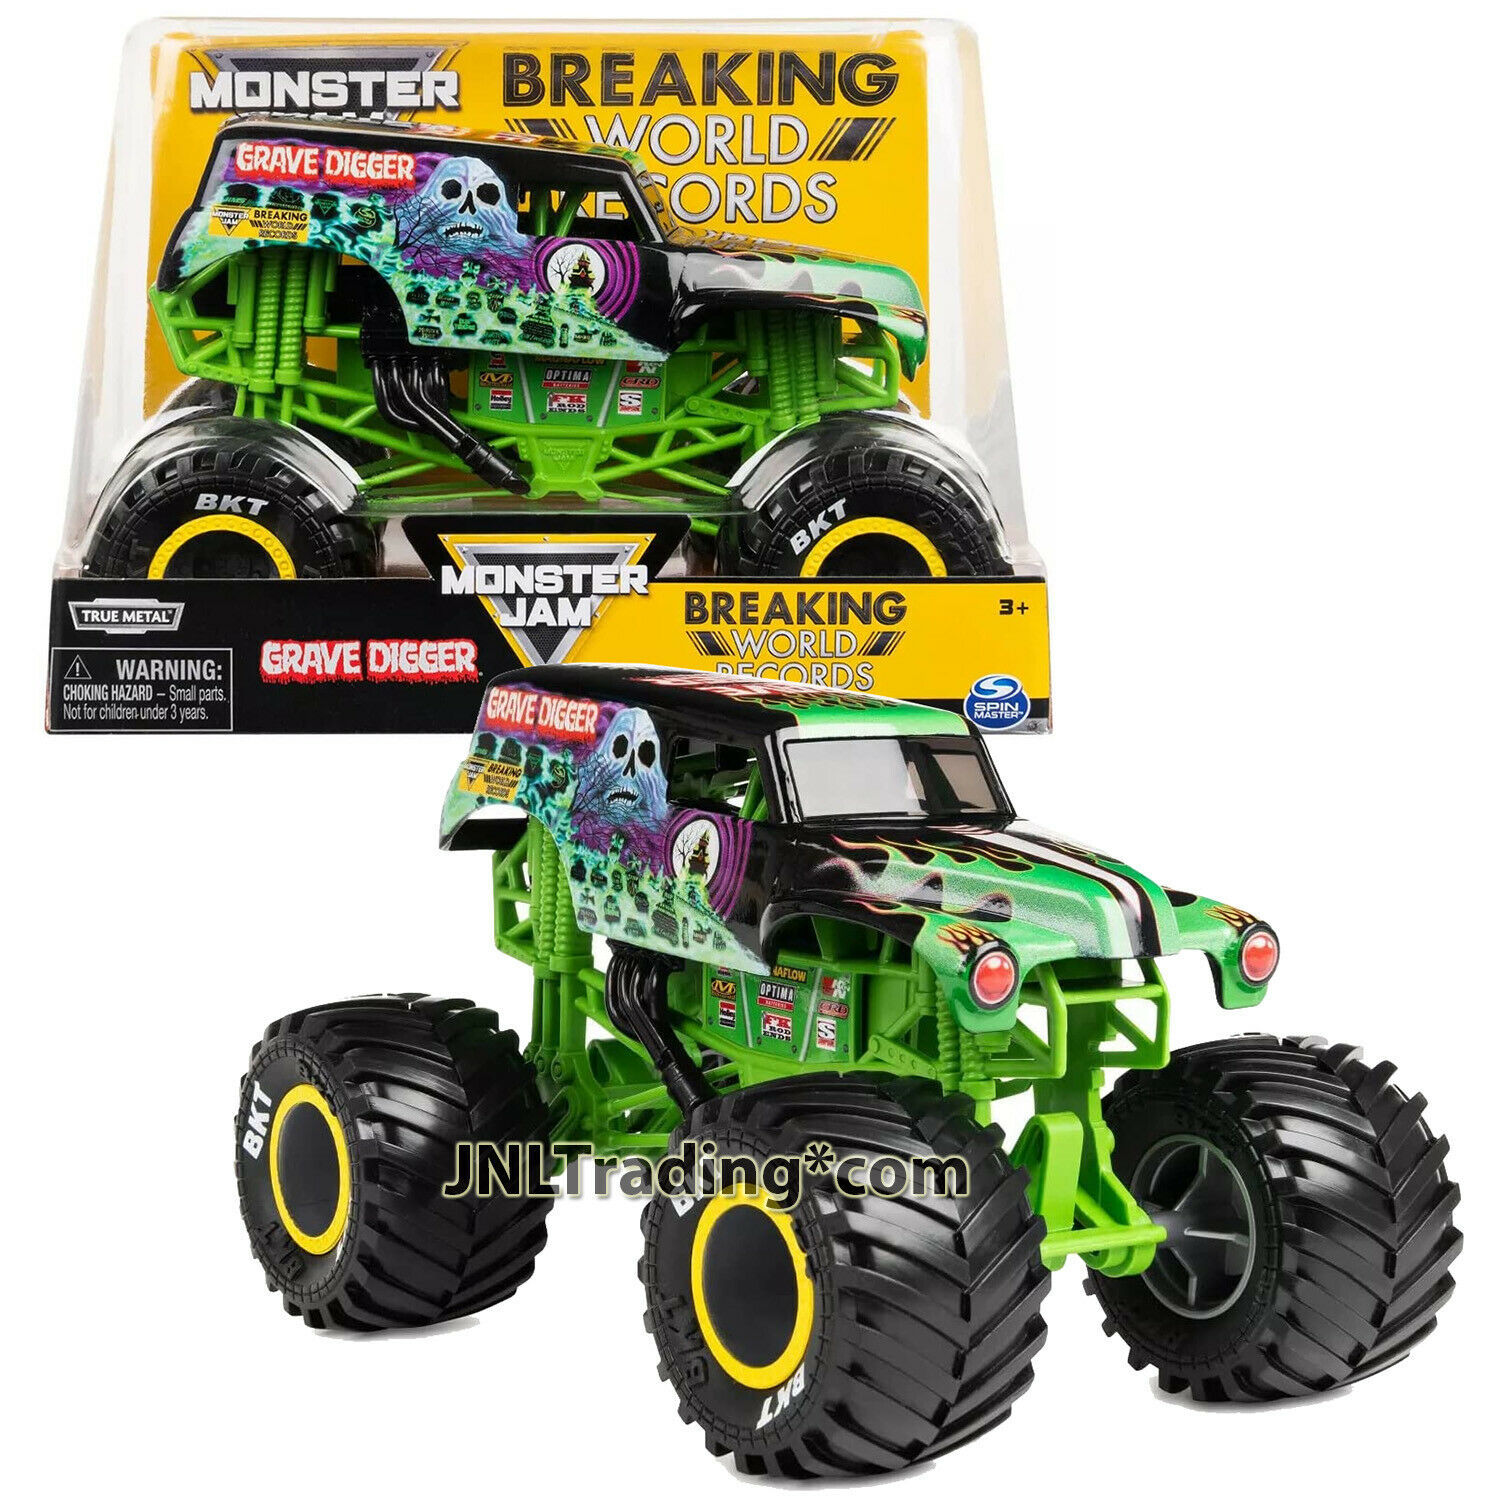 Primary image for Year 2021 Monster Jam 1:24 Scale Die Cast Metal Truck World Record GRAVE DIGGER